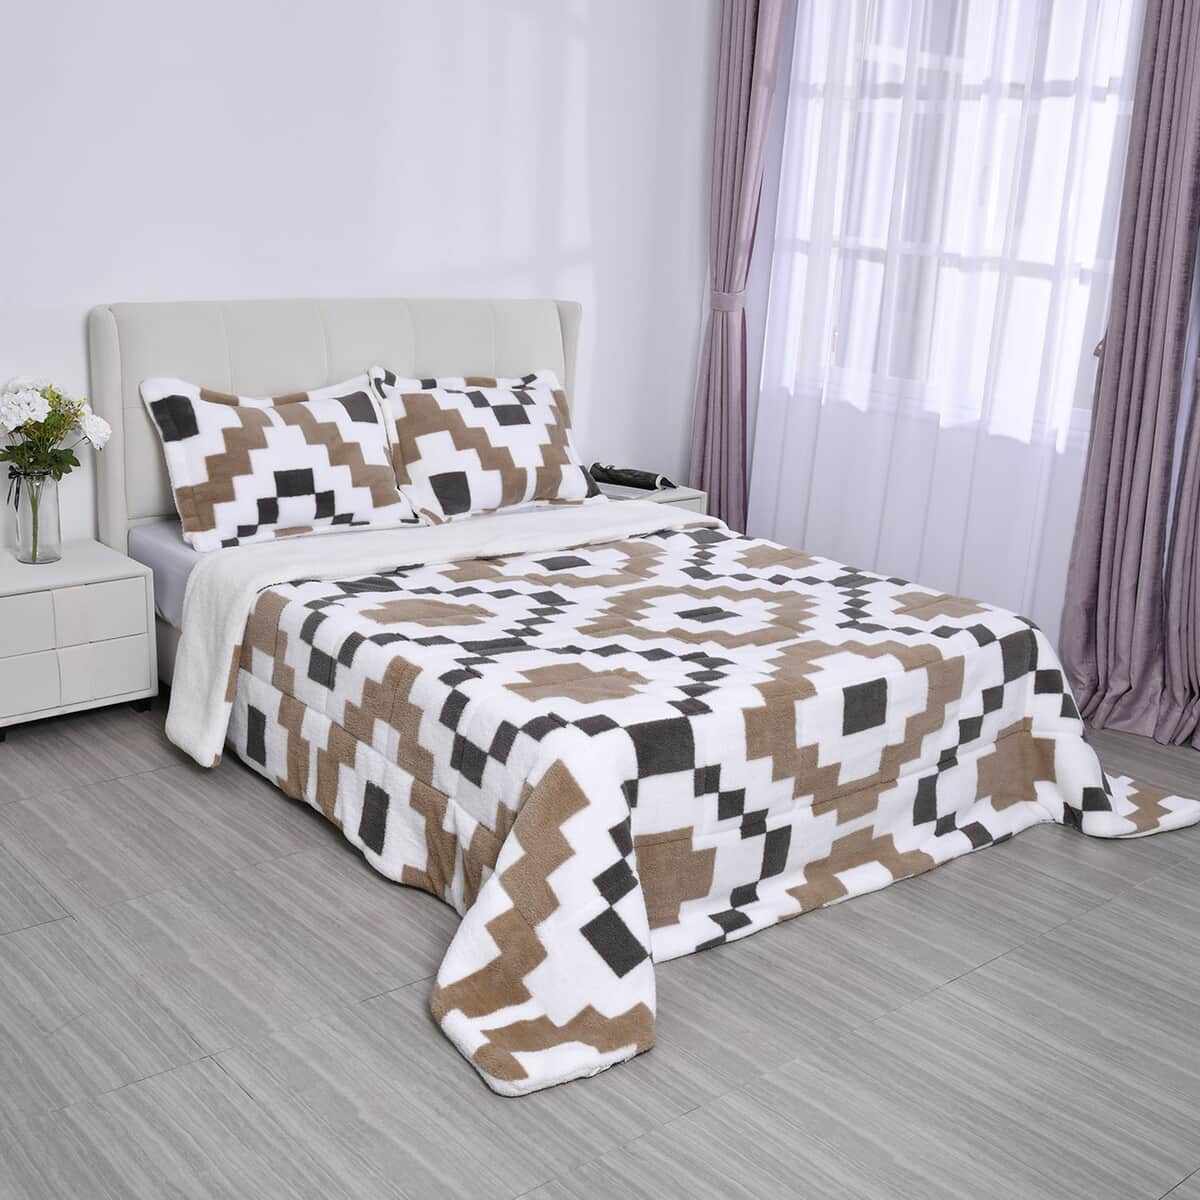 Homesmart Set of 3 Camel Checkered Color Printed Sherpa Comforter and Pillowcase image number 0